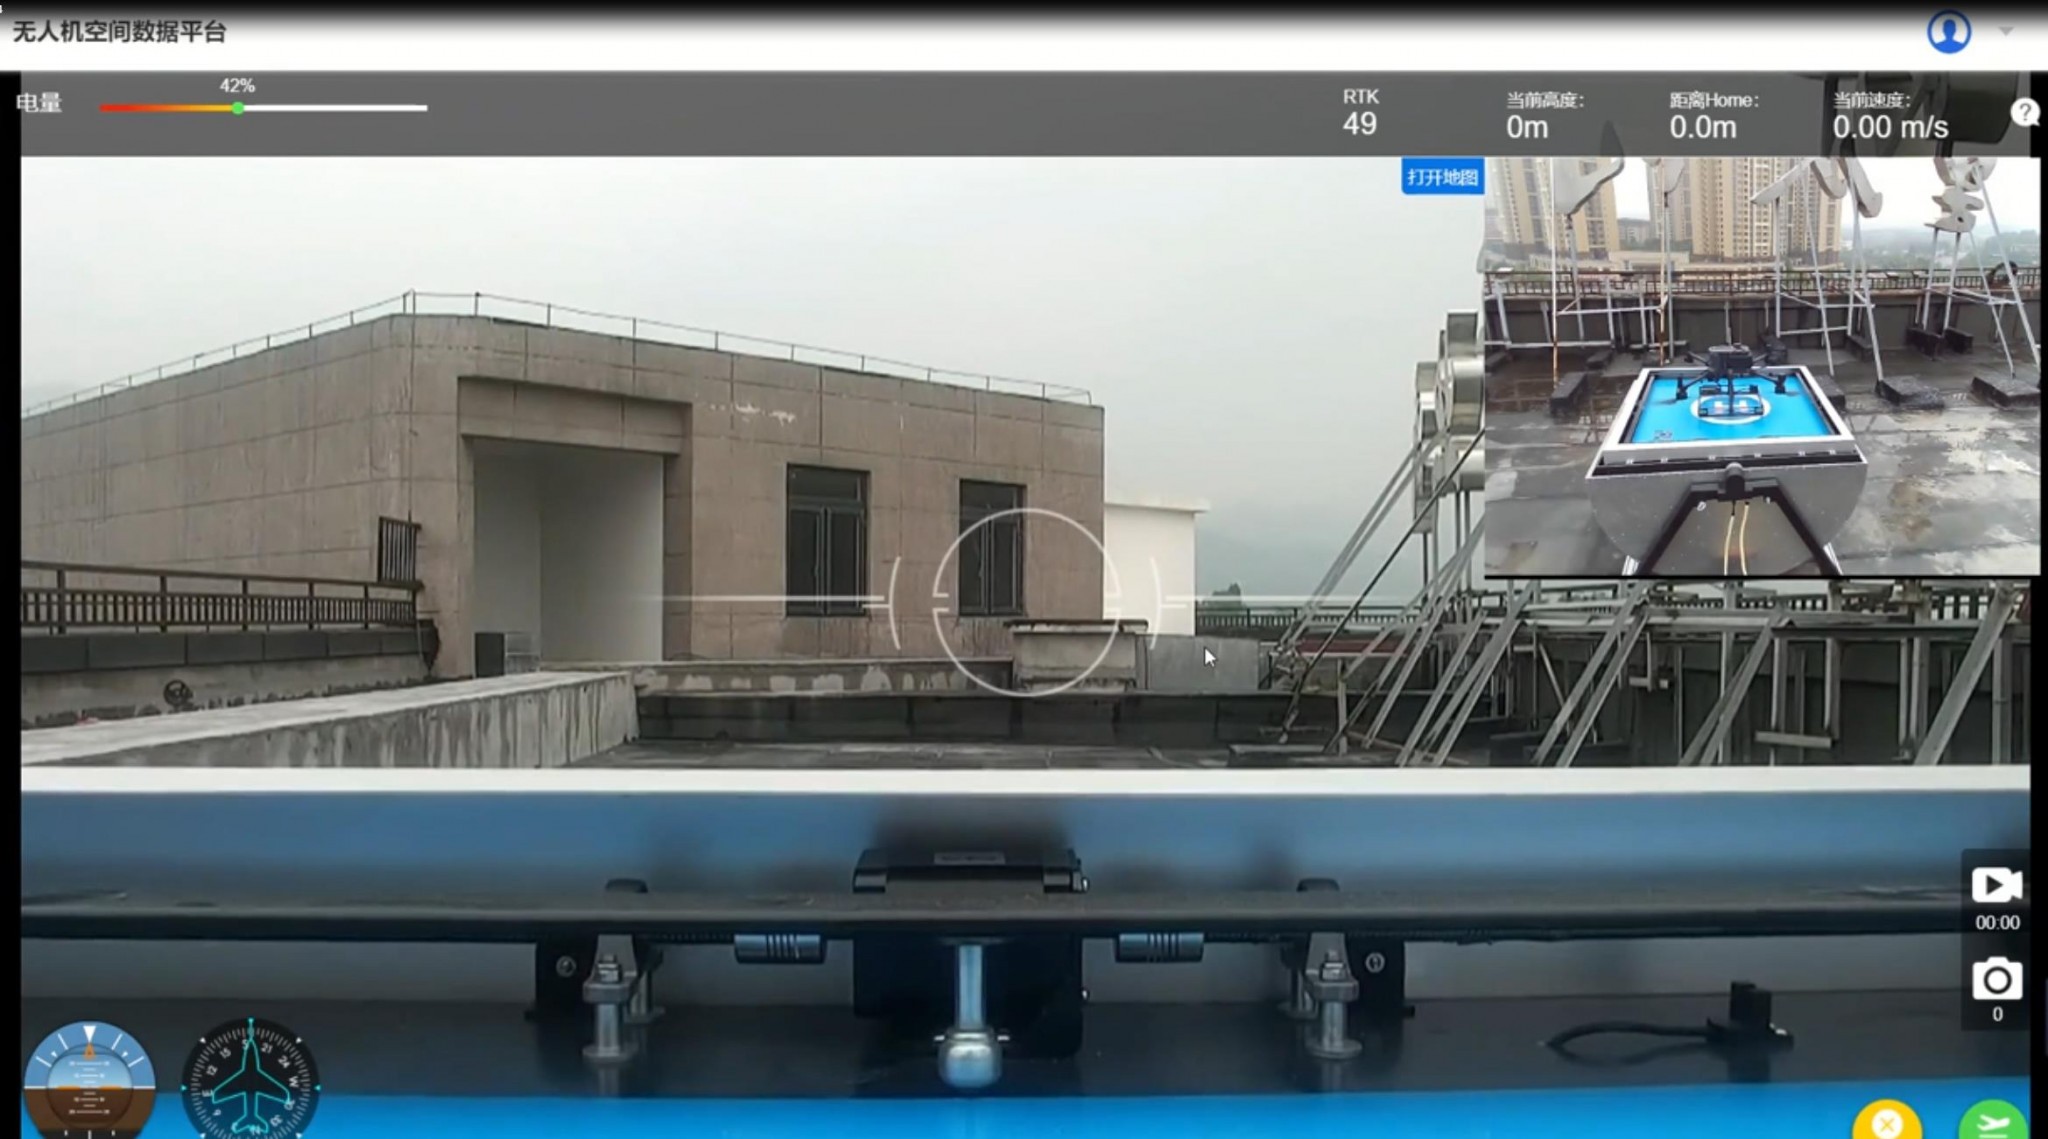 A complete flight demo of the D135 drone dock from a Chongqing customer